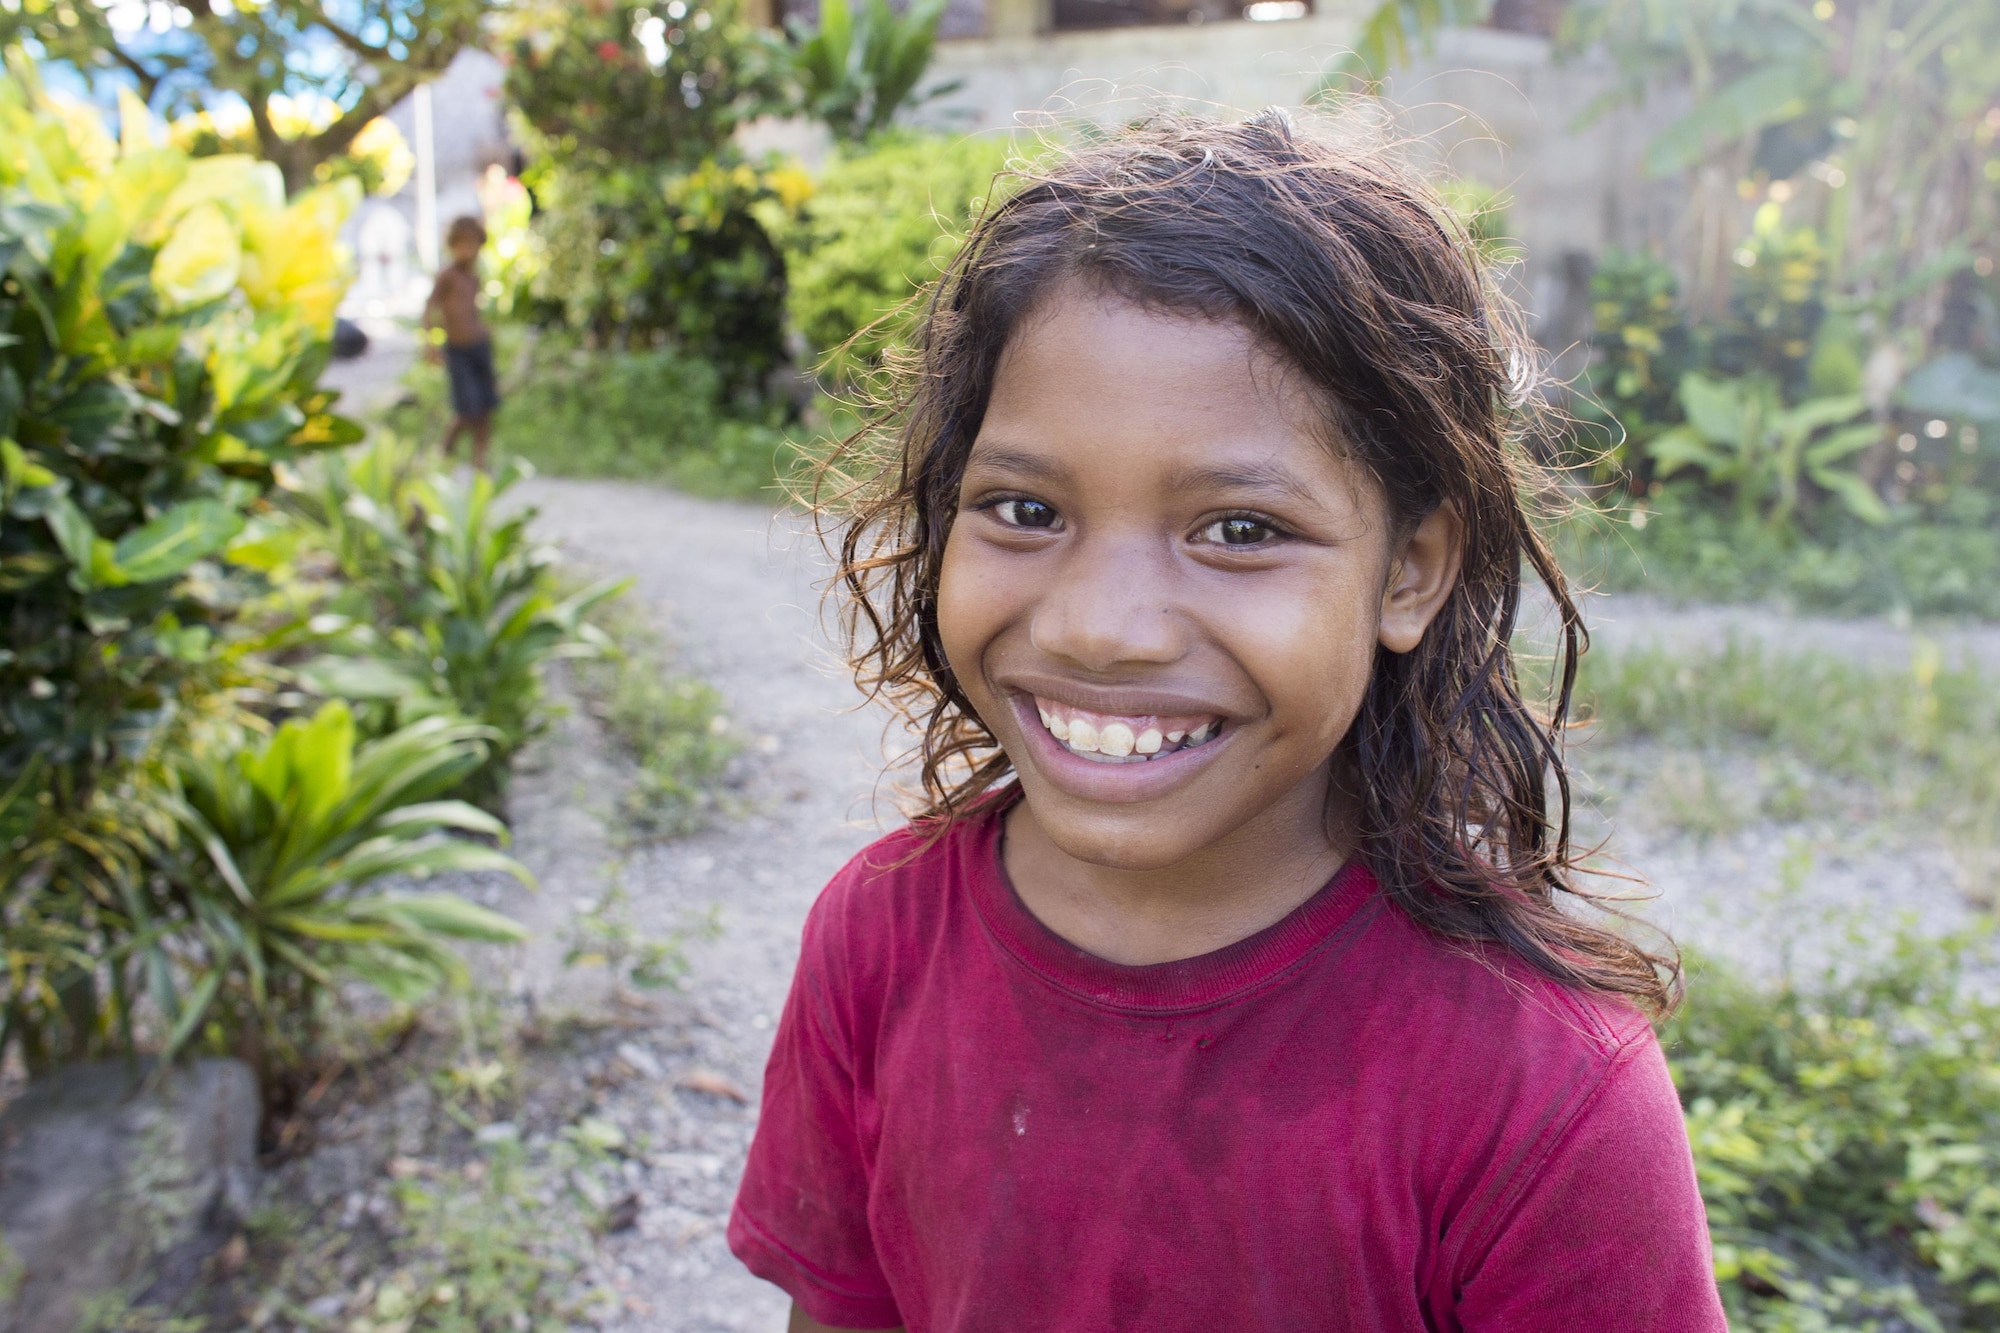 A island child smiles in anticipation of gifts during Operation Christmas Drop at Fais Island, Federated States of Micronesia, Dec. 8, 2015. A C-130 Hercules from the 36th Airlift Squadron delivered more than 800 pounds of supplies to Fais island during Operation Christmas Drop 2015. This year marks the first trilateral execution that includes air support from the Japan Air-Self Defense Force and the Royal Australian Air Force. (U.S. Air Force photo by Osakabe Yasuo/Released)